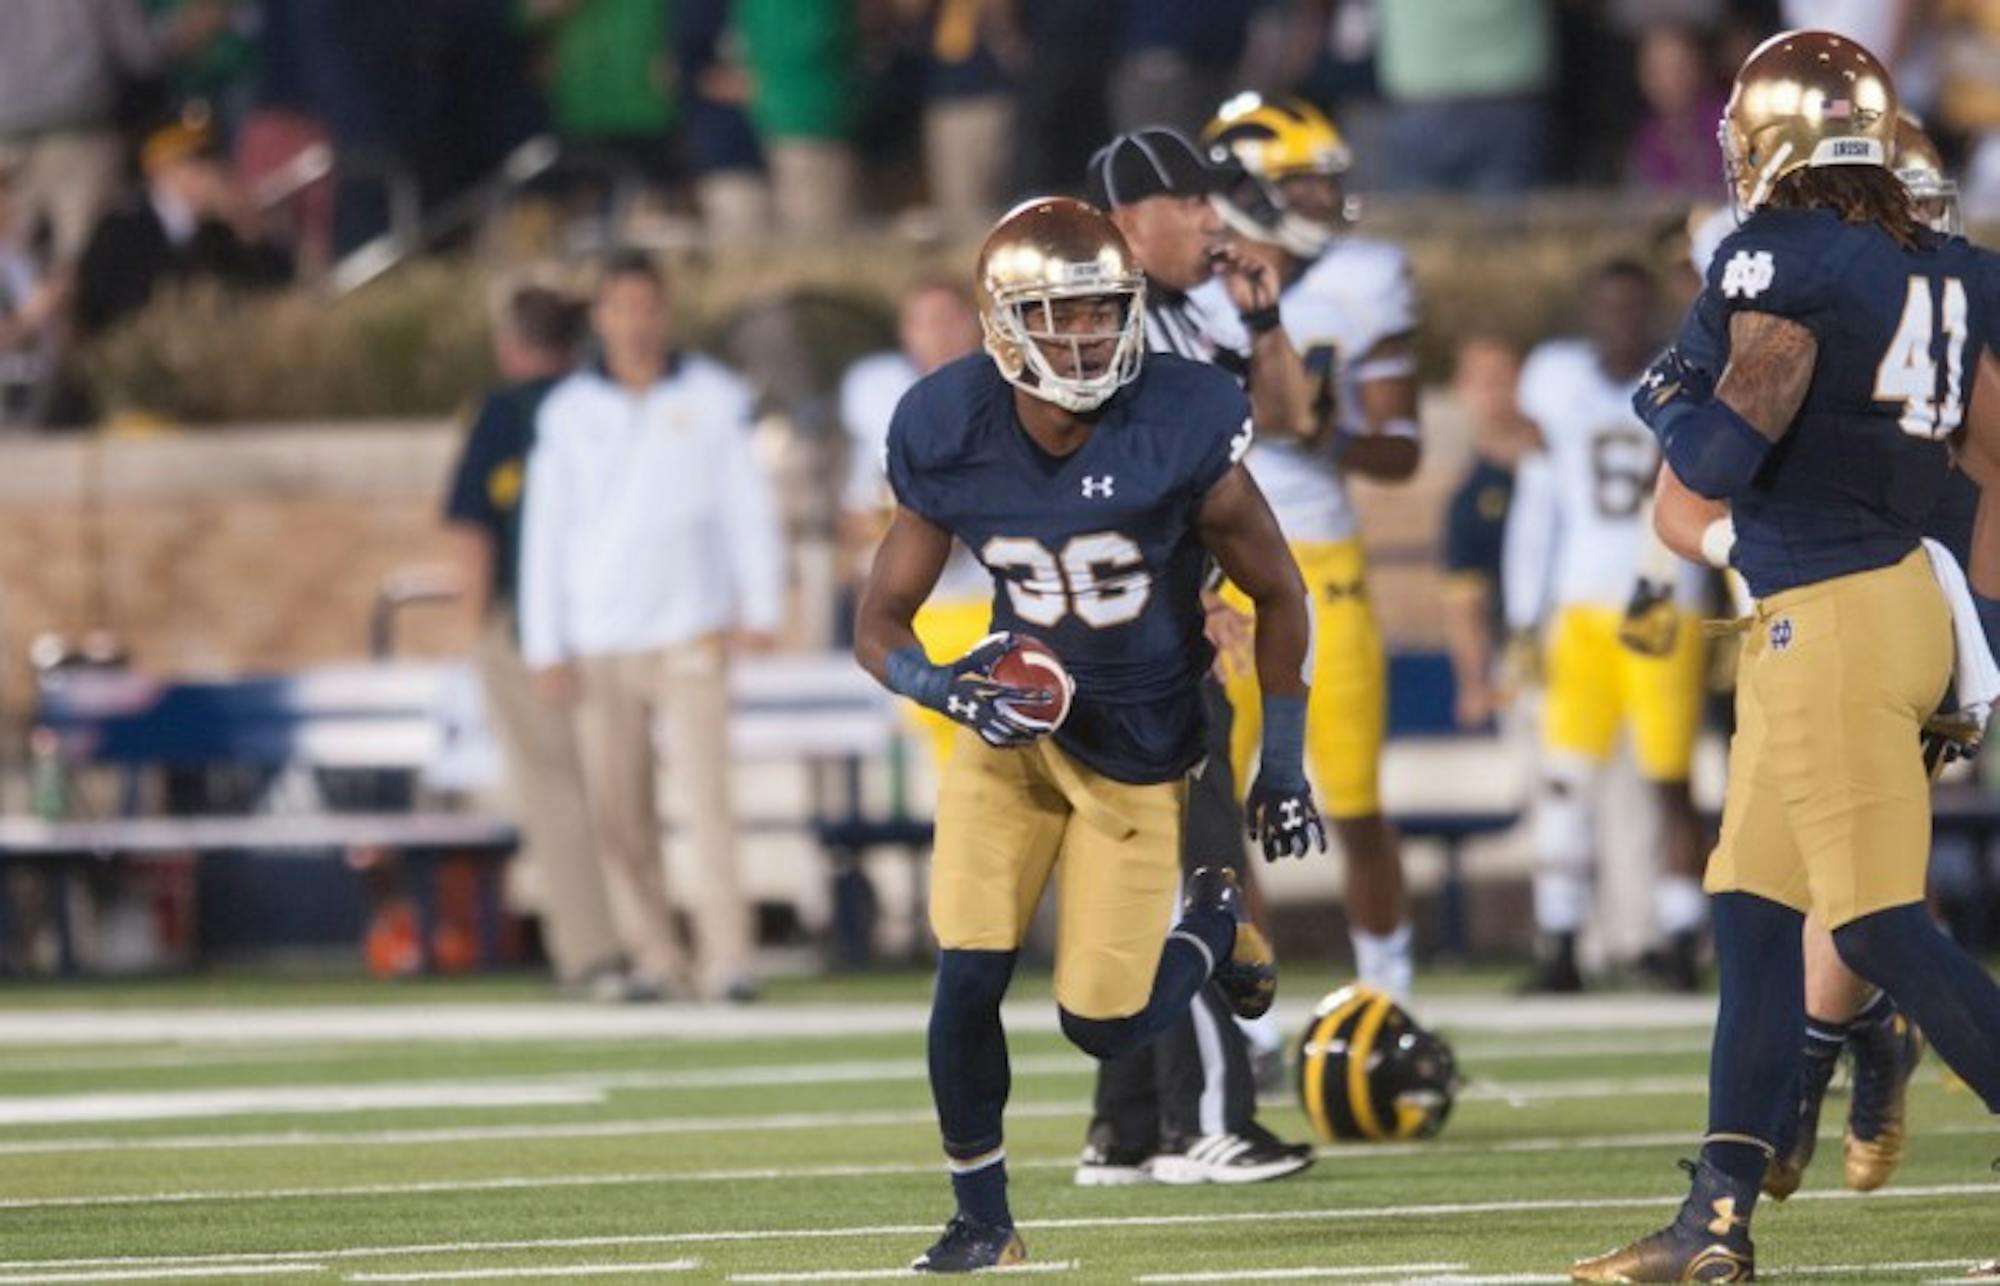 Irish sophomore cornerback Cole Luke turns downfield during Notre Dame’s 31-0 victory over Michigan on Saturday. Luke had a near-interception against the Wolverines.